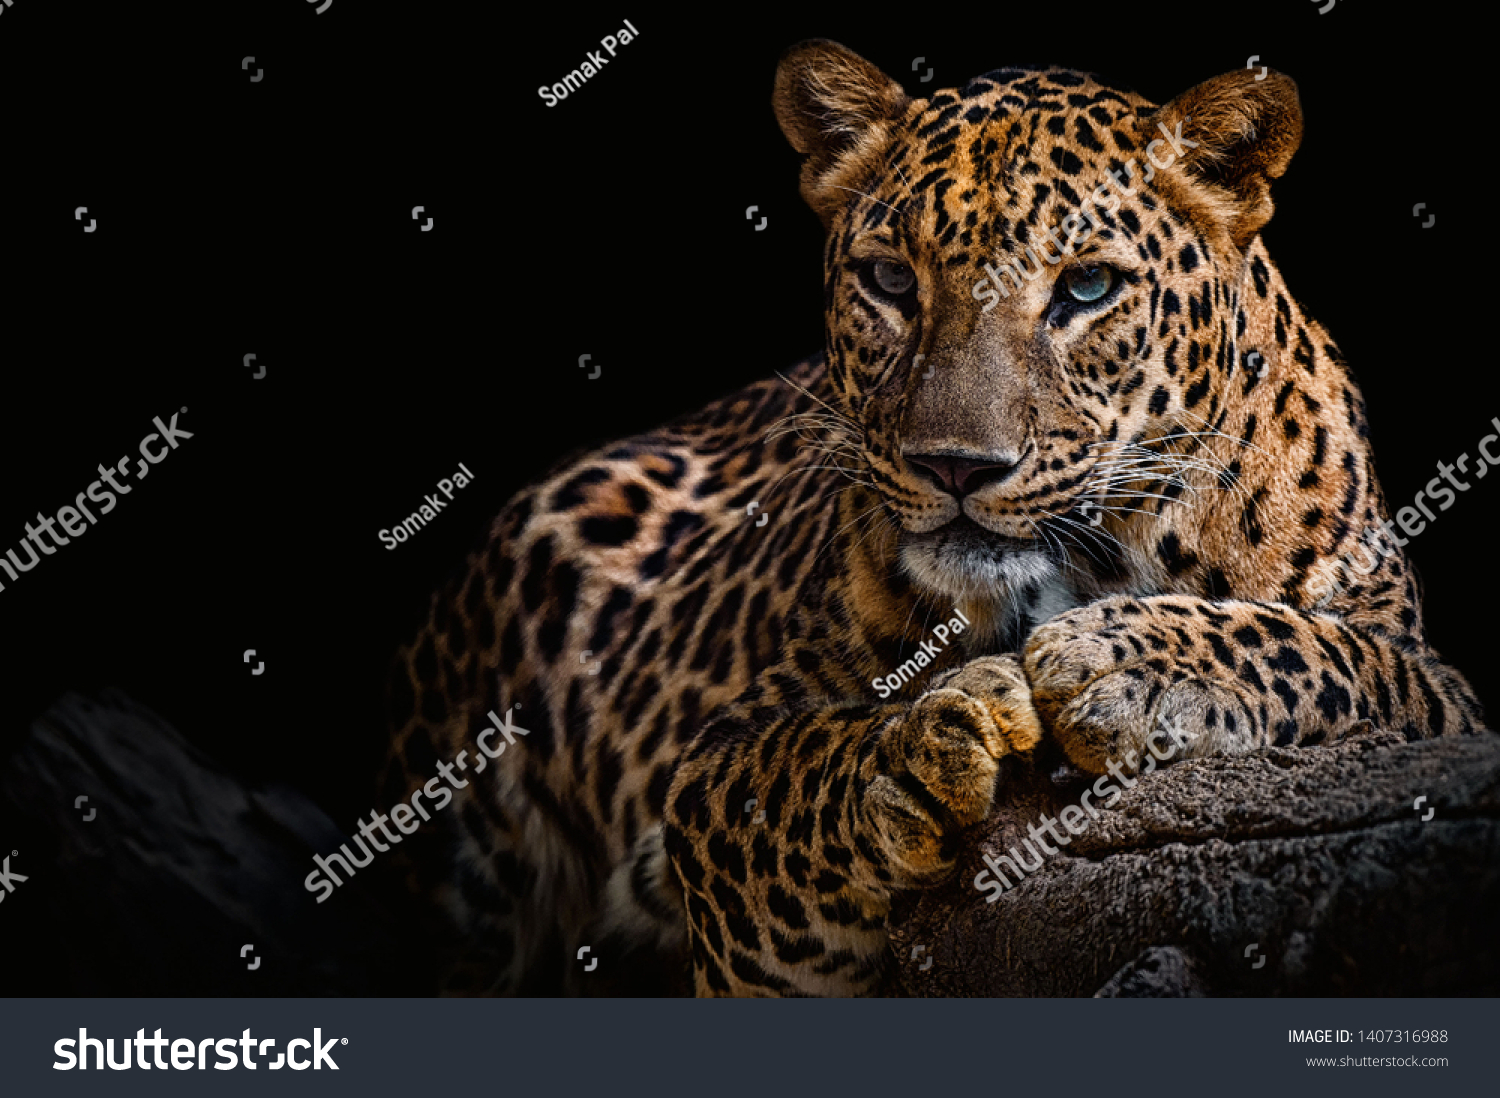 remote image of leopard for hw2b